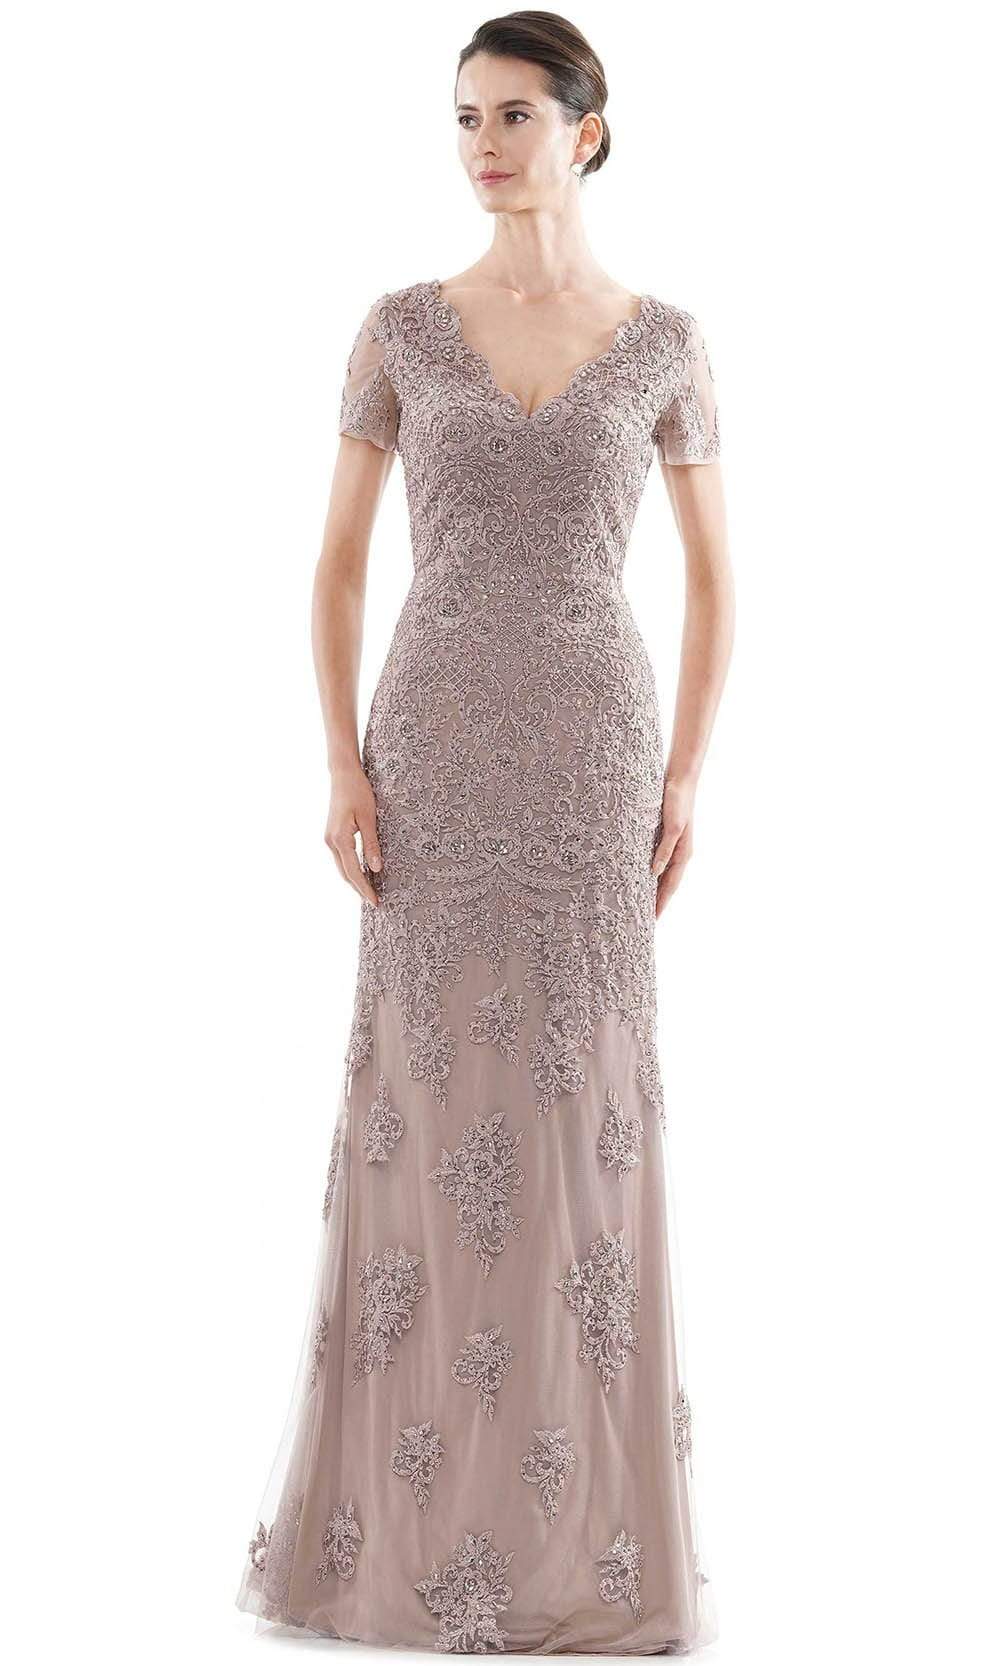 Rina Di Montella - RD2710 Scallop V-Neck Embroidered Mesh Gown Mother of the Bride Dresses 4 / Dark Taupe